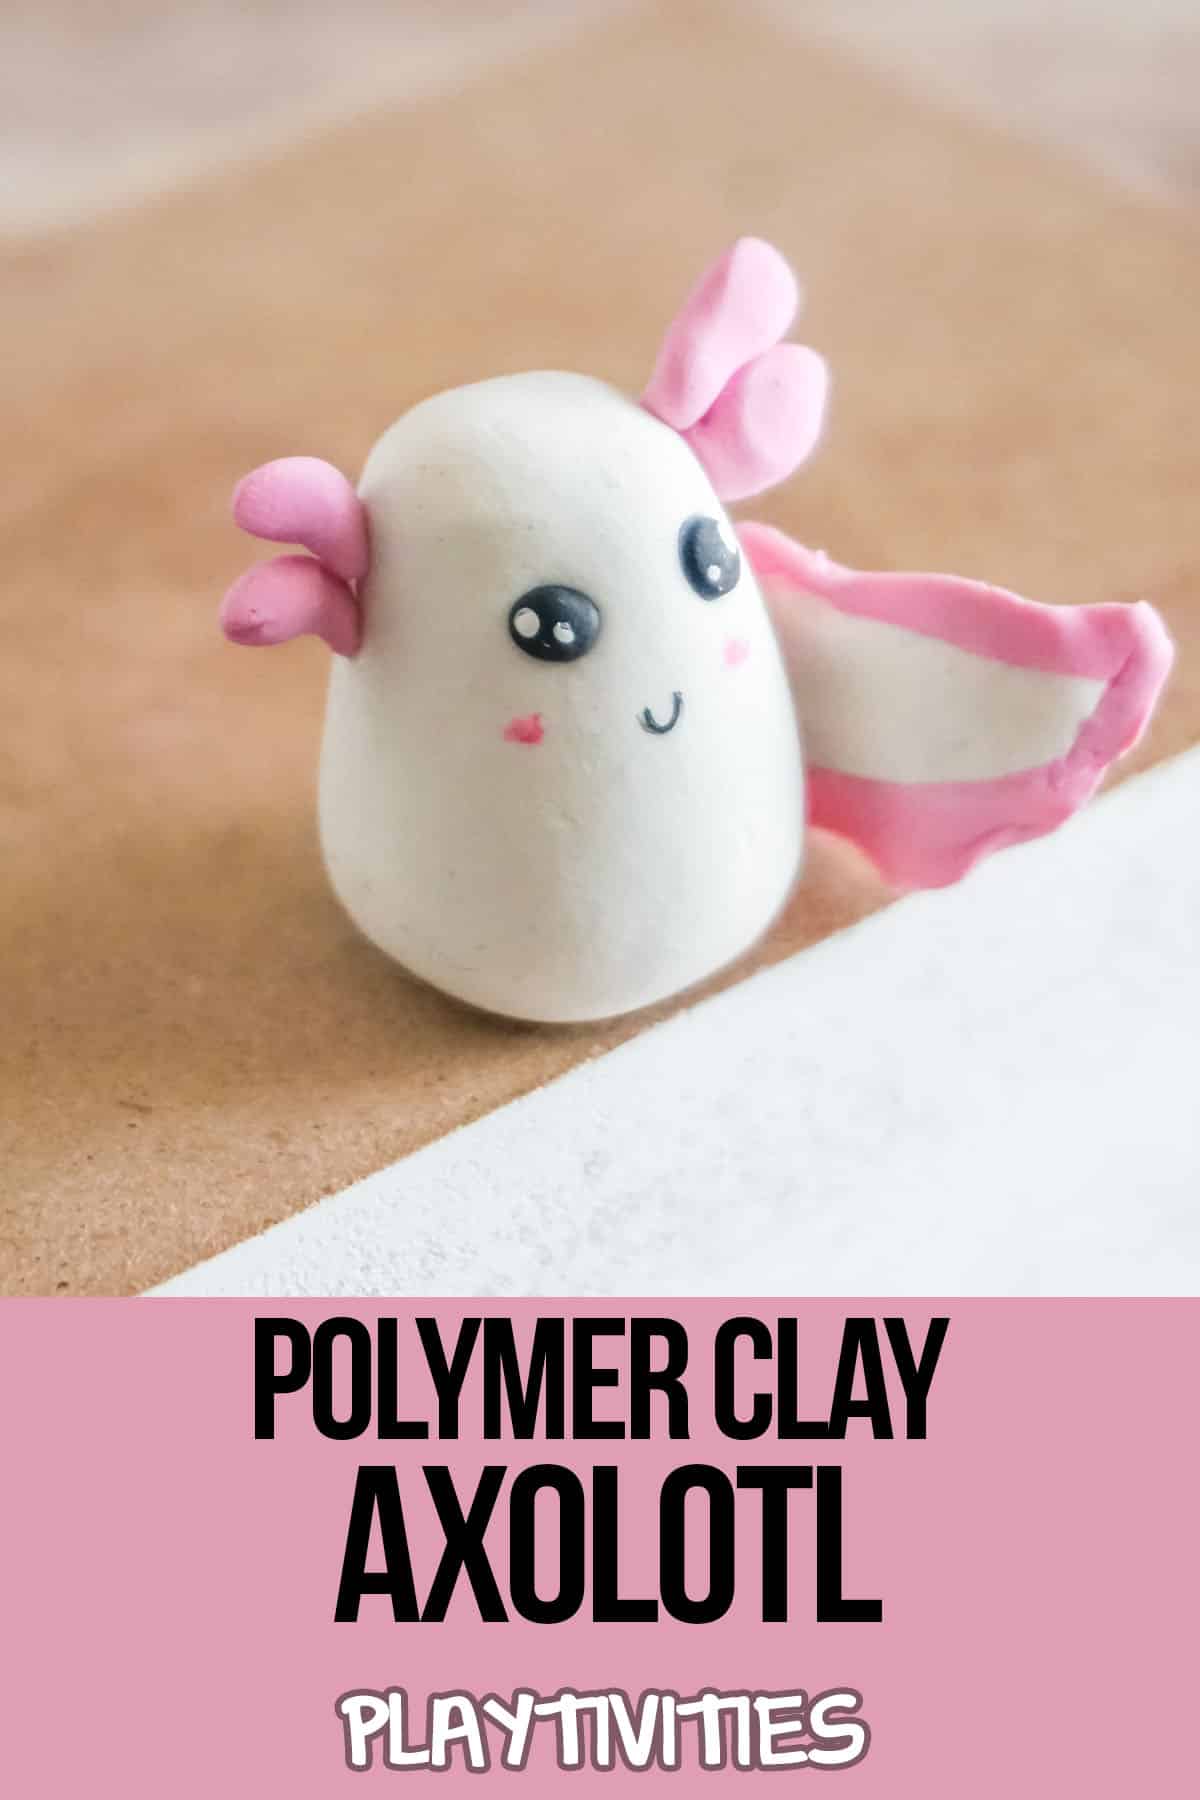 kids craft axolotl from clay with text which reads polymer clay axolotl